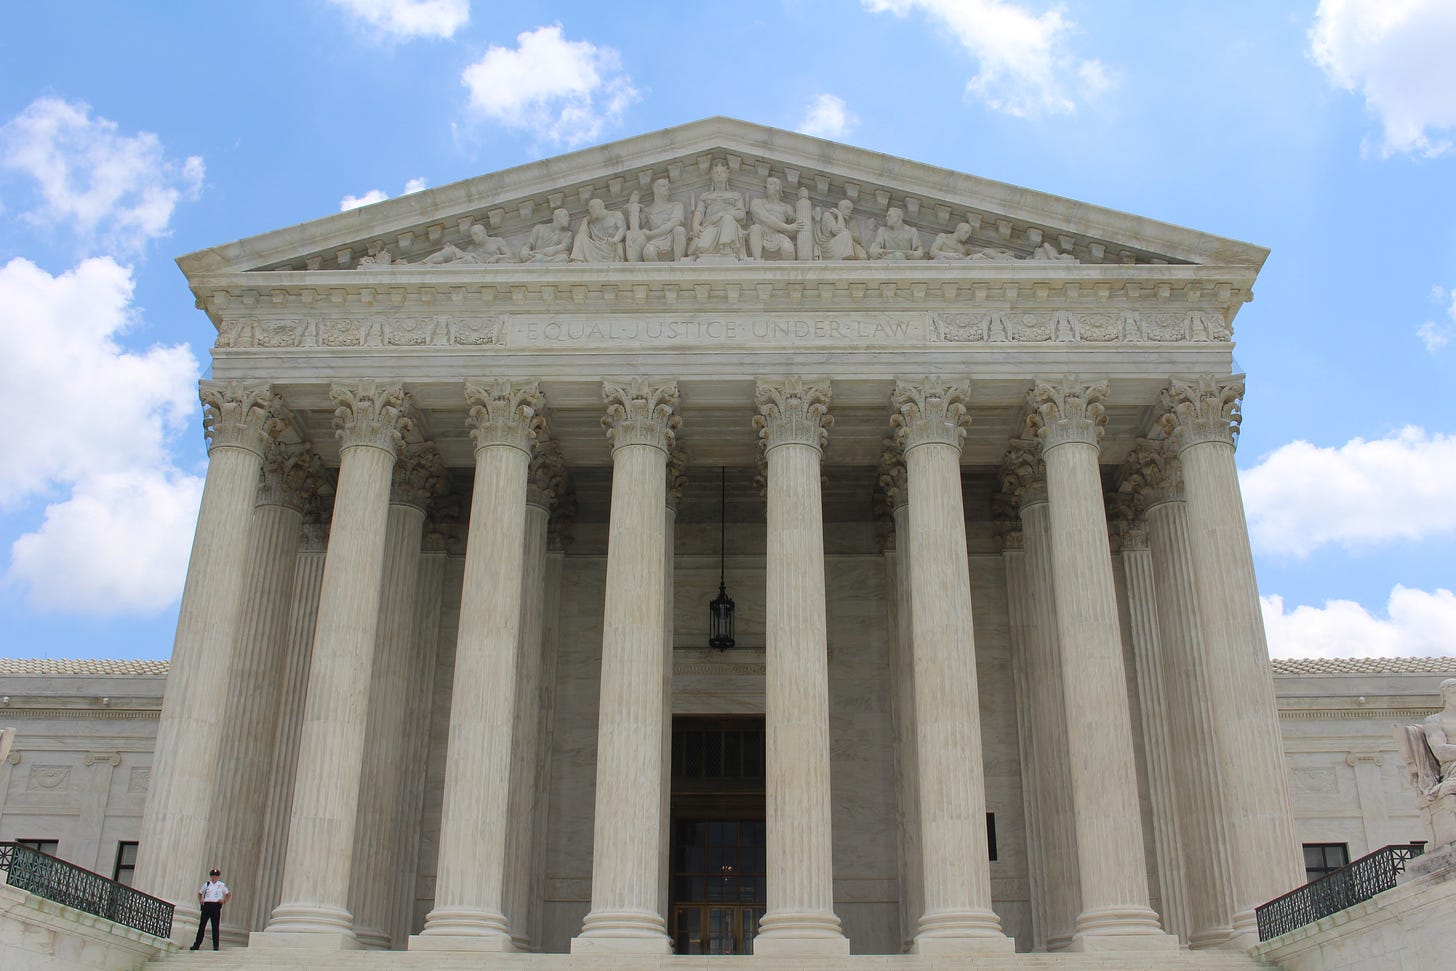 Photo of the front of the Supreme Court building taken on a sunny day with blue sky and white clouds in the background. 